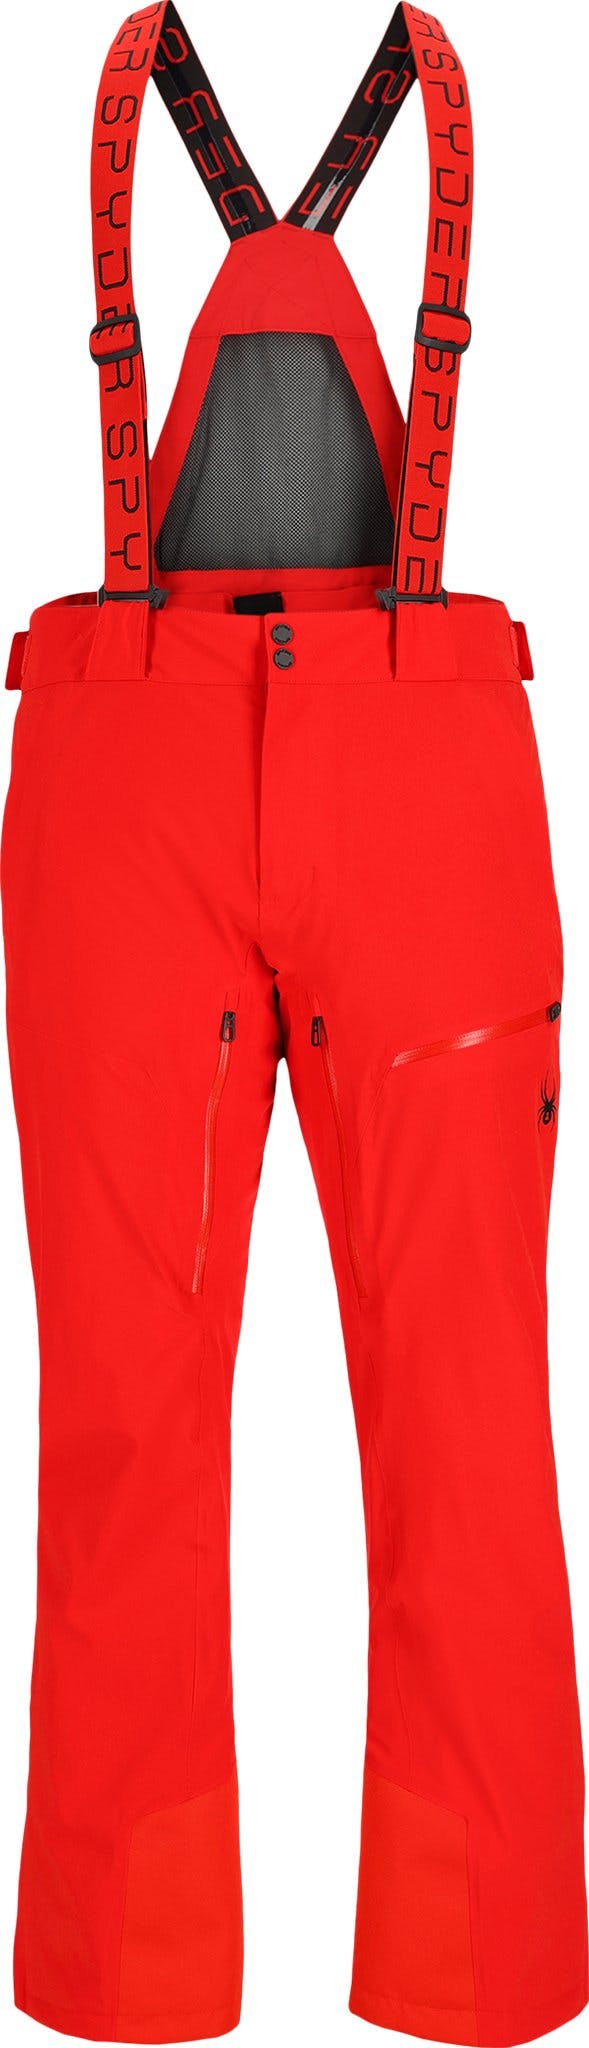 Product image for Dare Insulated Ski Pant - Men's